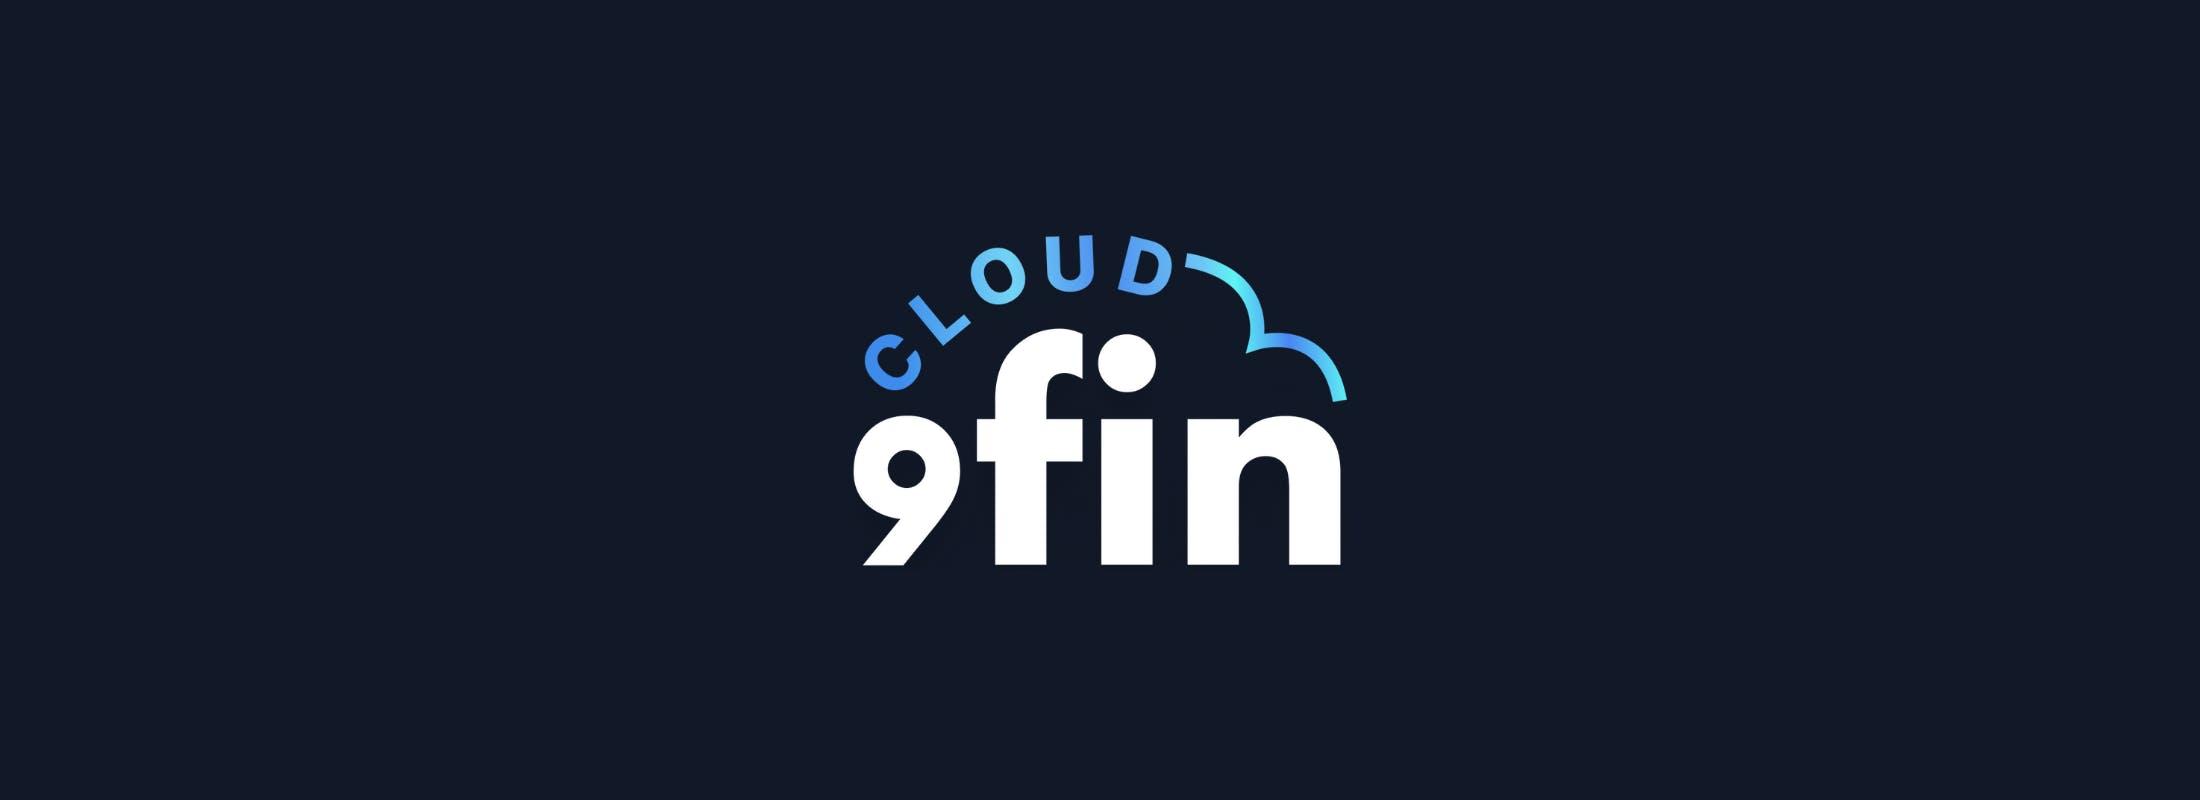 Cloud 9fin — Doctor Who?